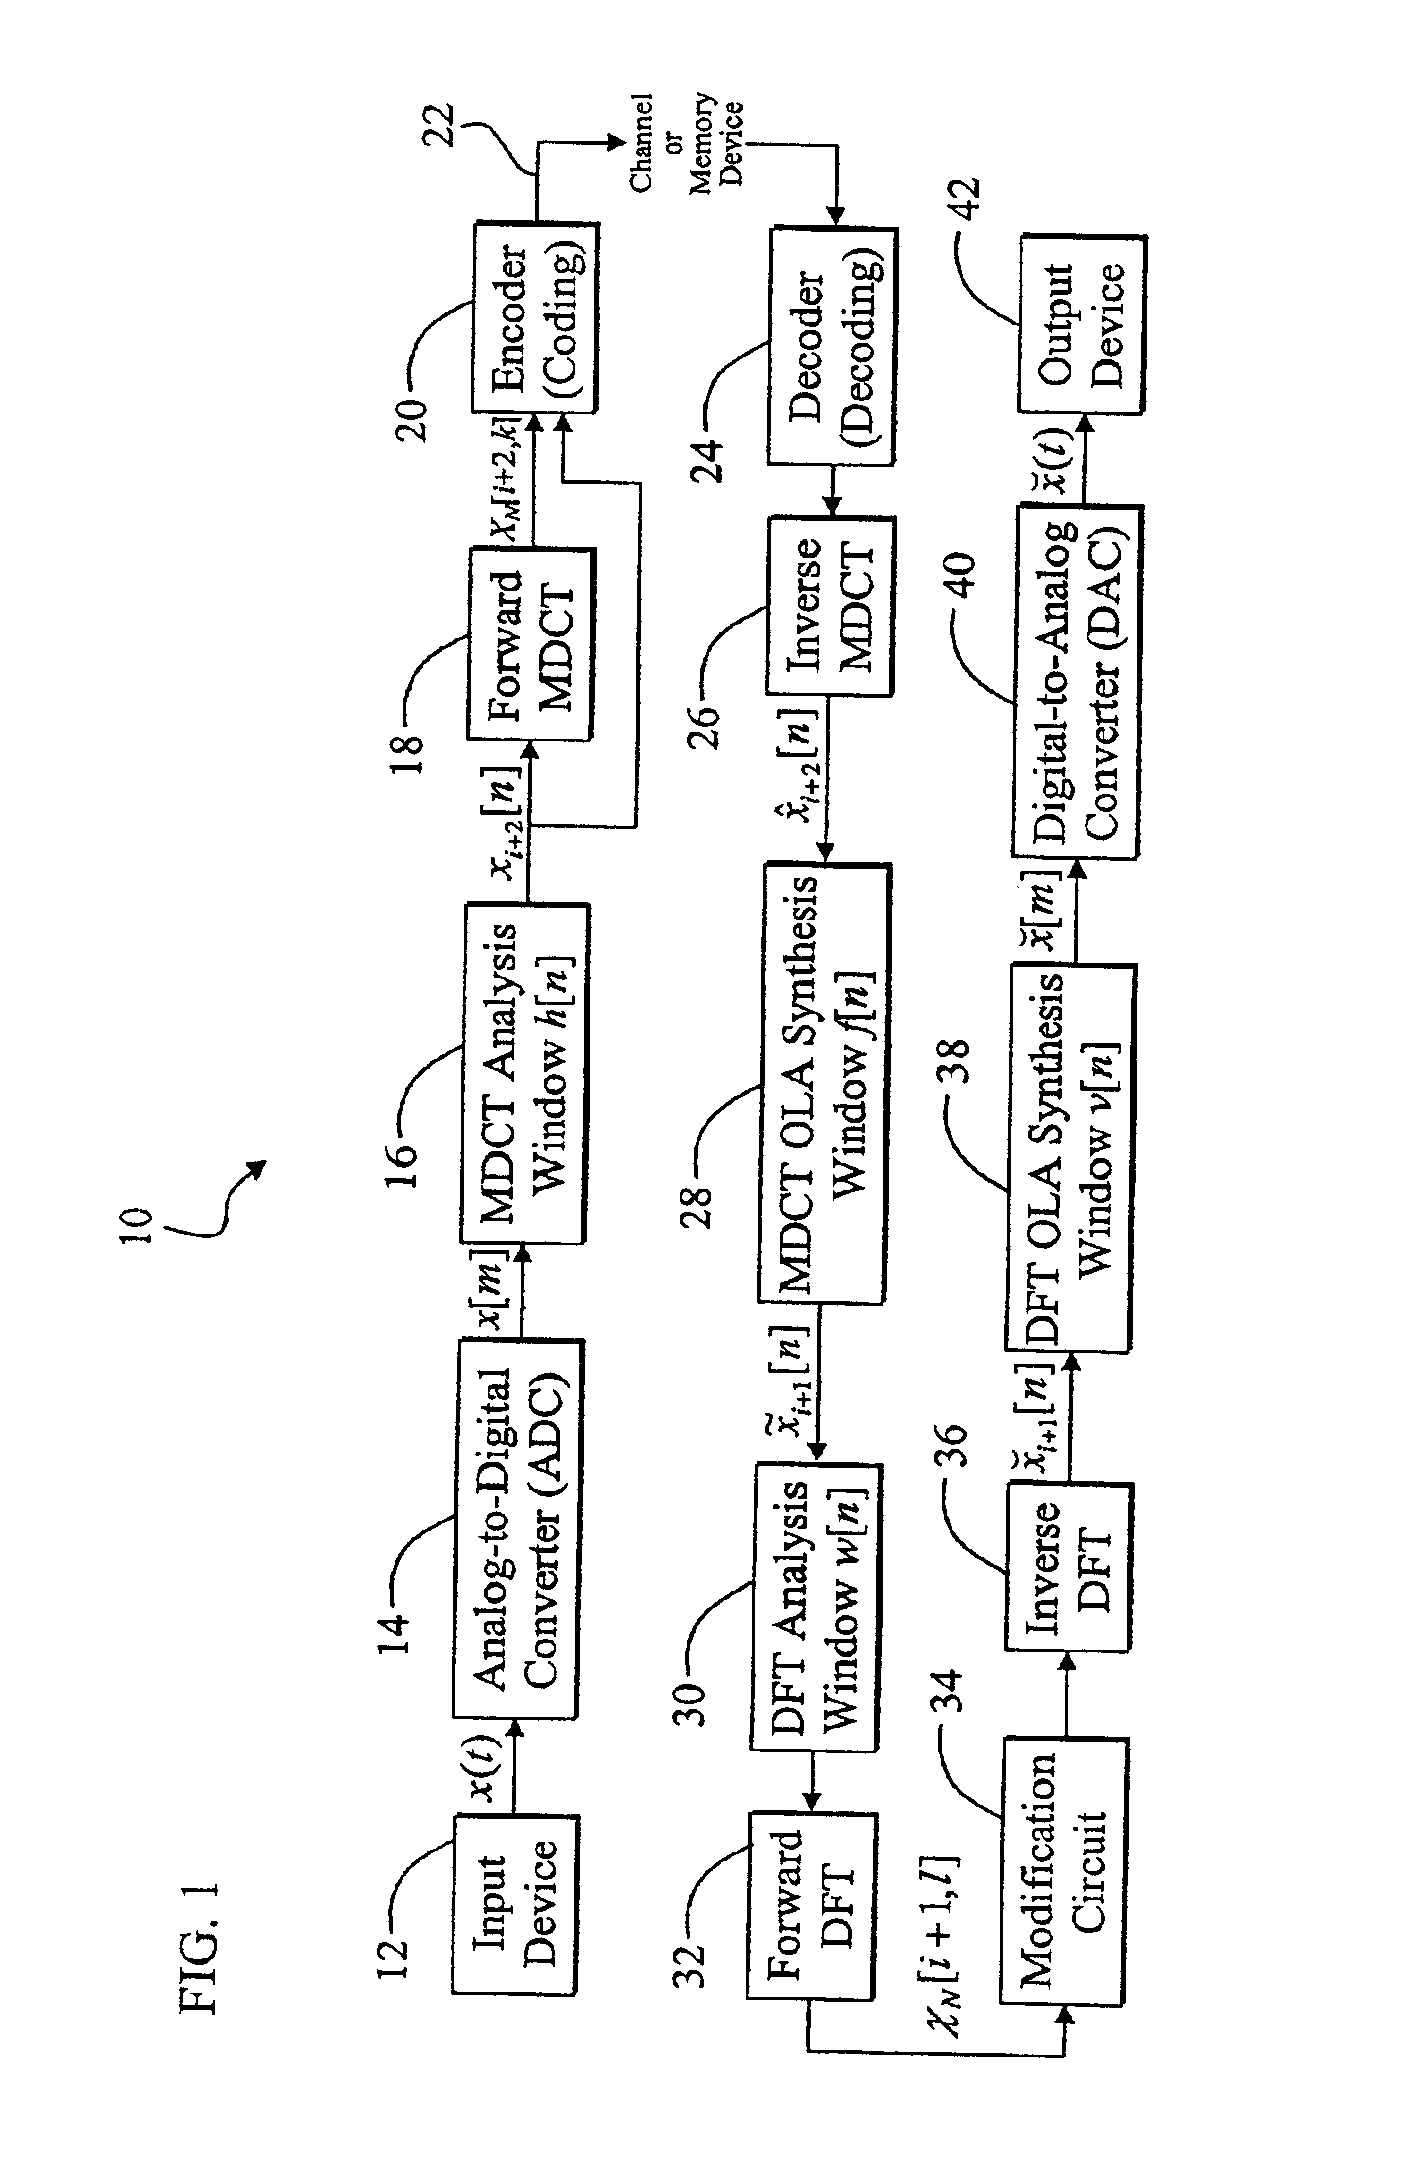 Efficient system and method for converting between different transform-domain signal representations